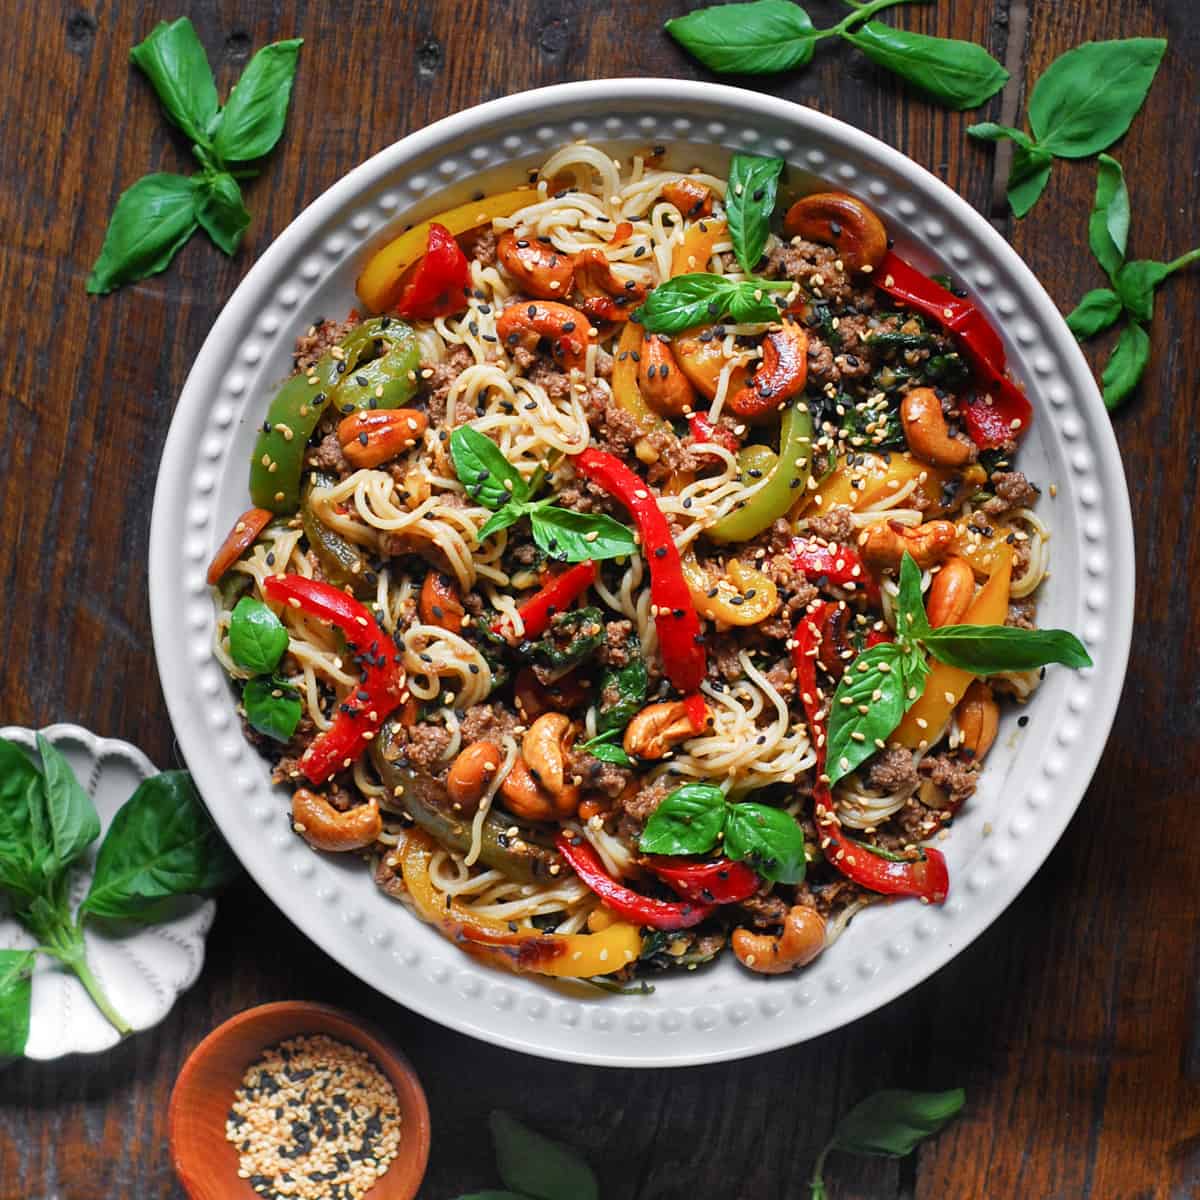 Ramen noodles stir fry with bell peppers, spinach, cashews, and ground beef - in a white bowl.